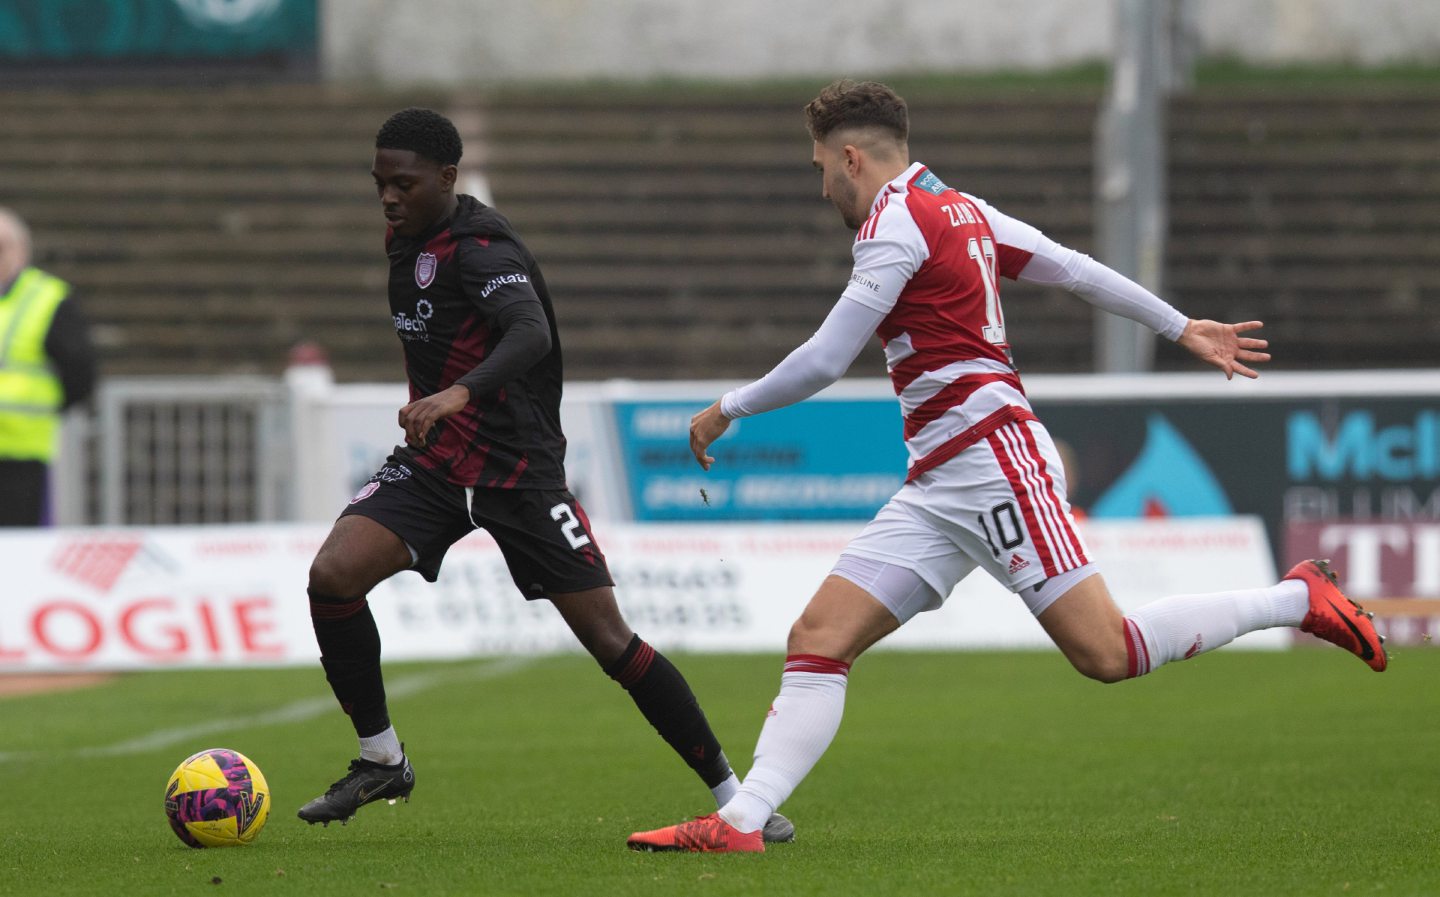 Marcel Oakley in action for Arbroath. Image: SNS